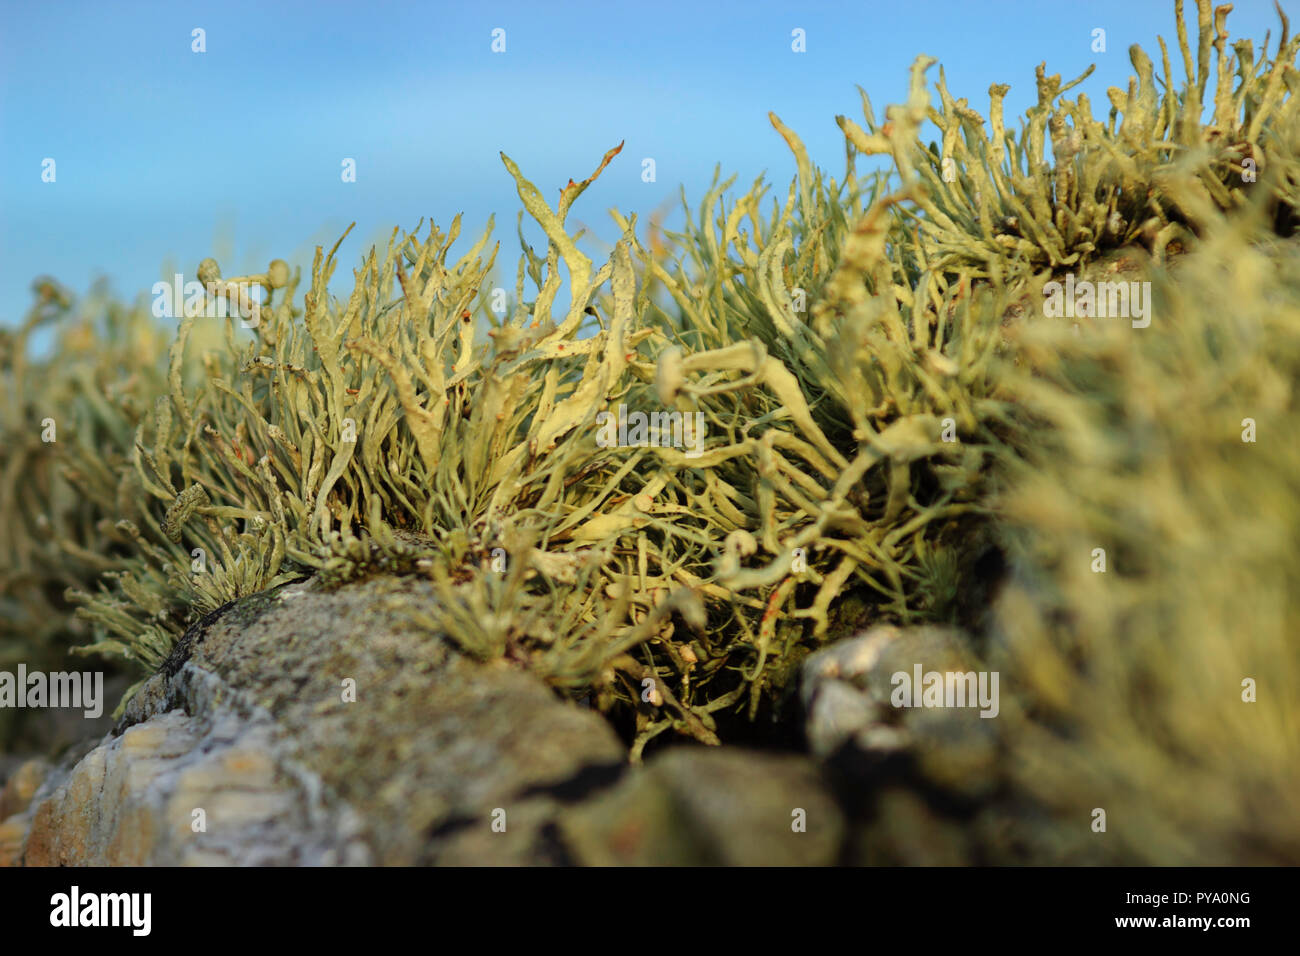 An image of coastal plants or flora growing on top of a rocky ledge against a blue sky. Stock Photo